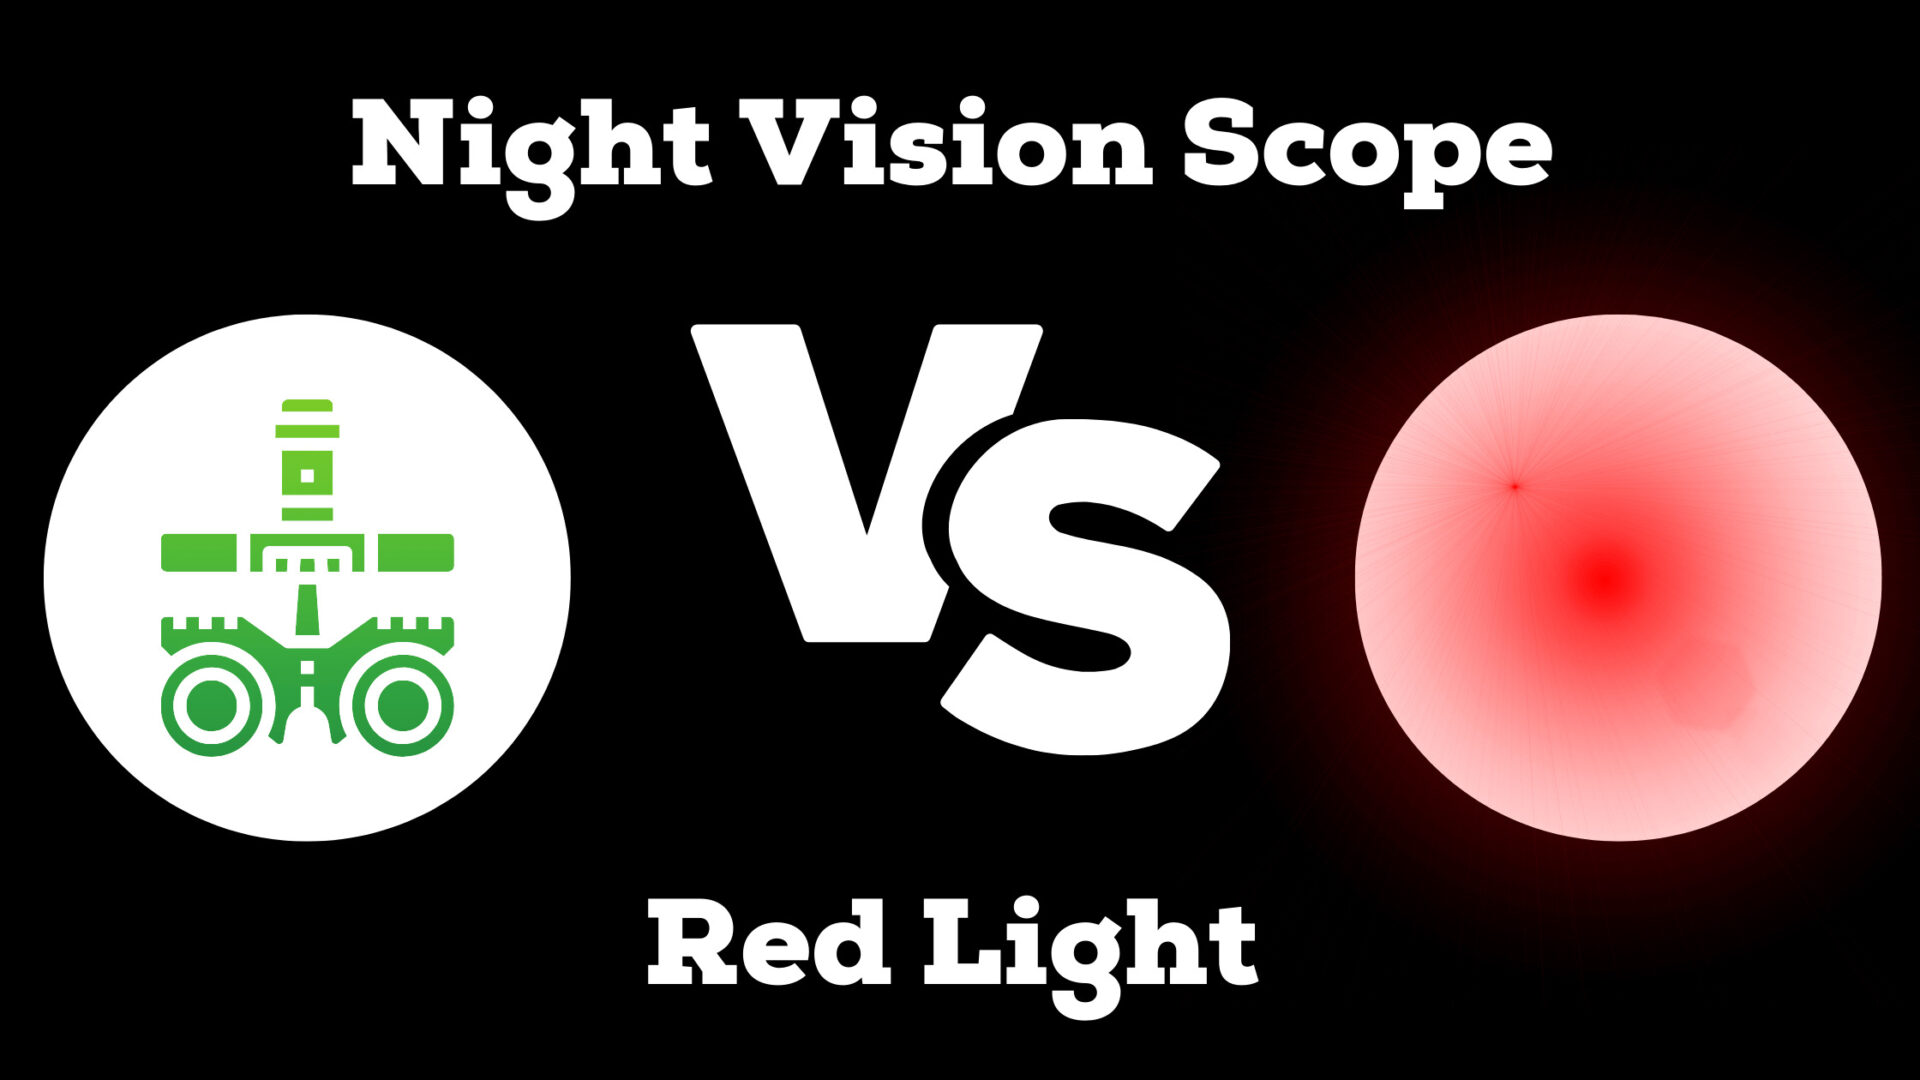 Night Vision Scope VS Red Light - What is the Difference?